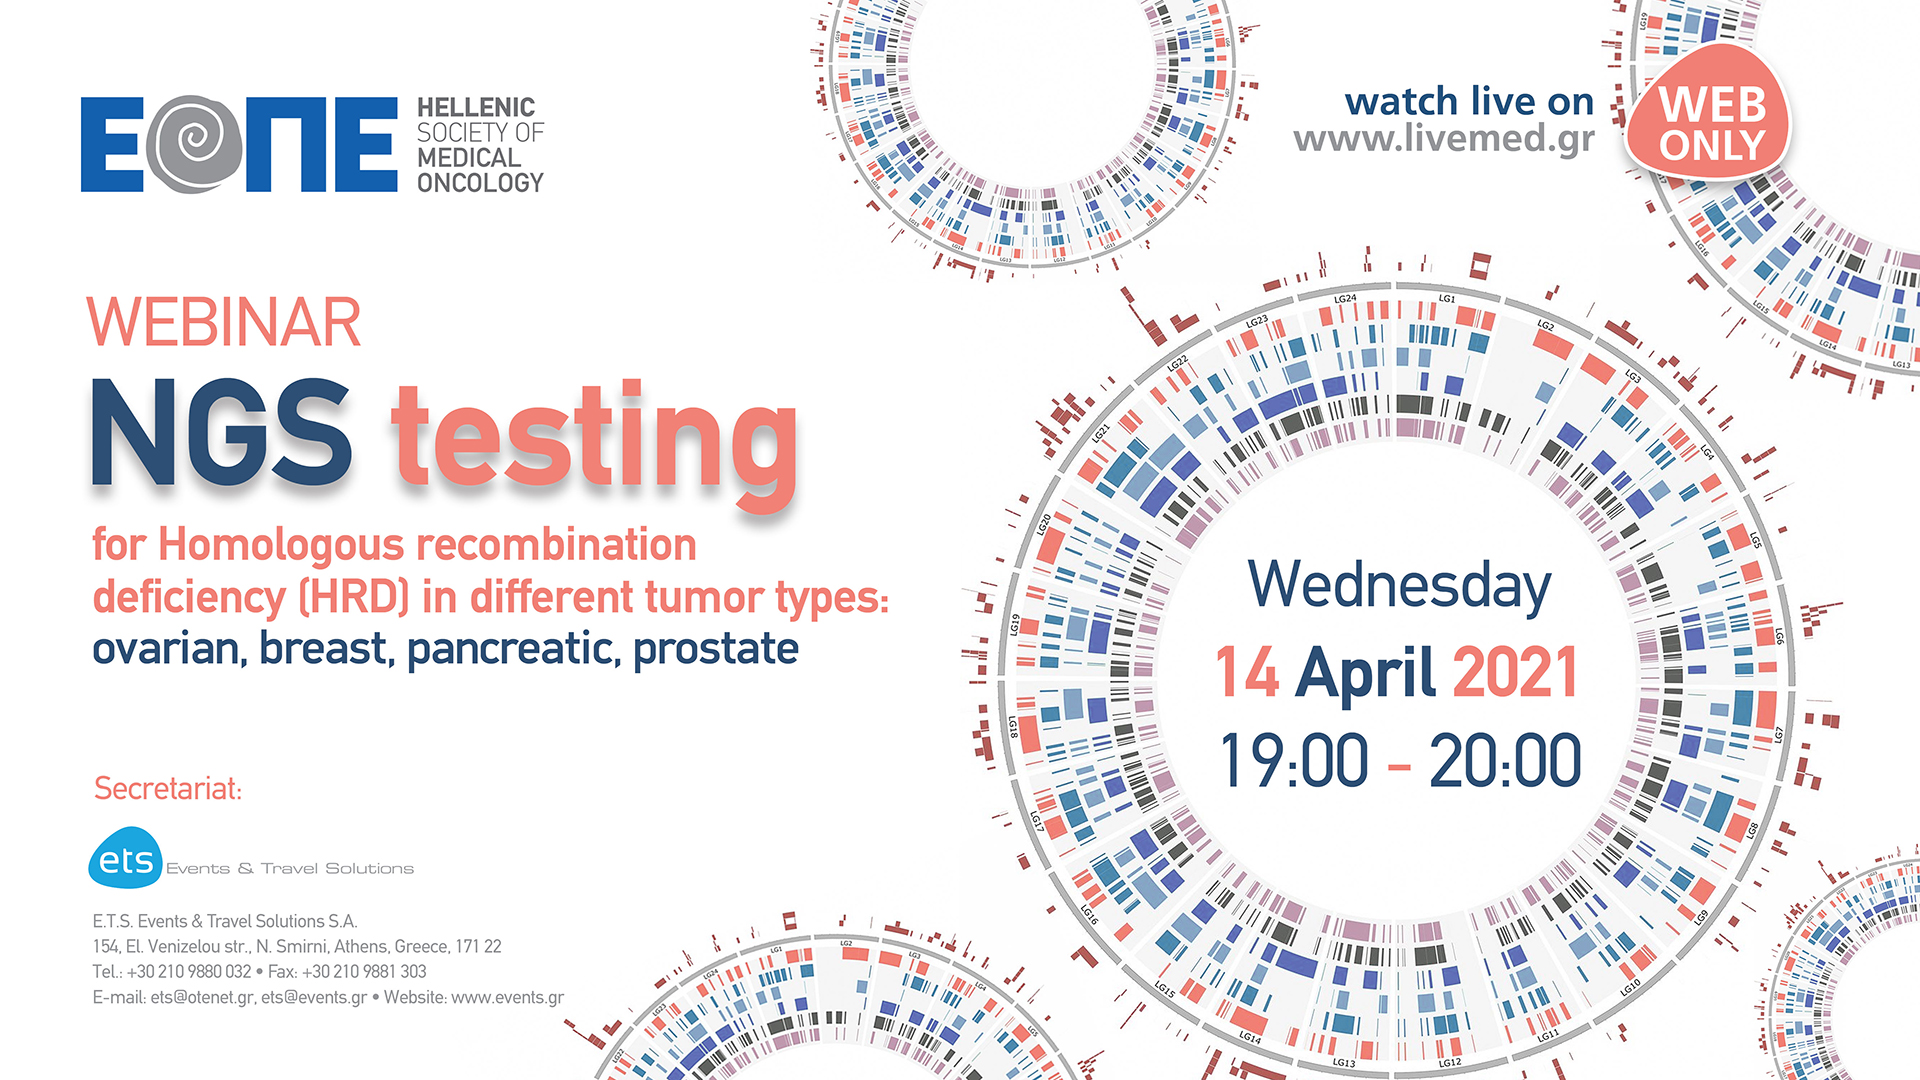 Webinar: NGS testing for Homologous recombination deficiency (HRD) in different tumor types: ovarian, breast, pancreatic, prostate